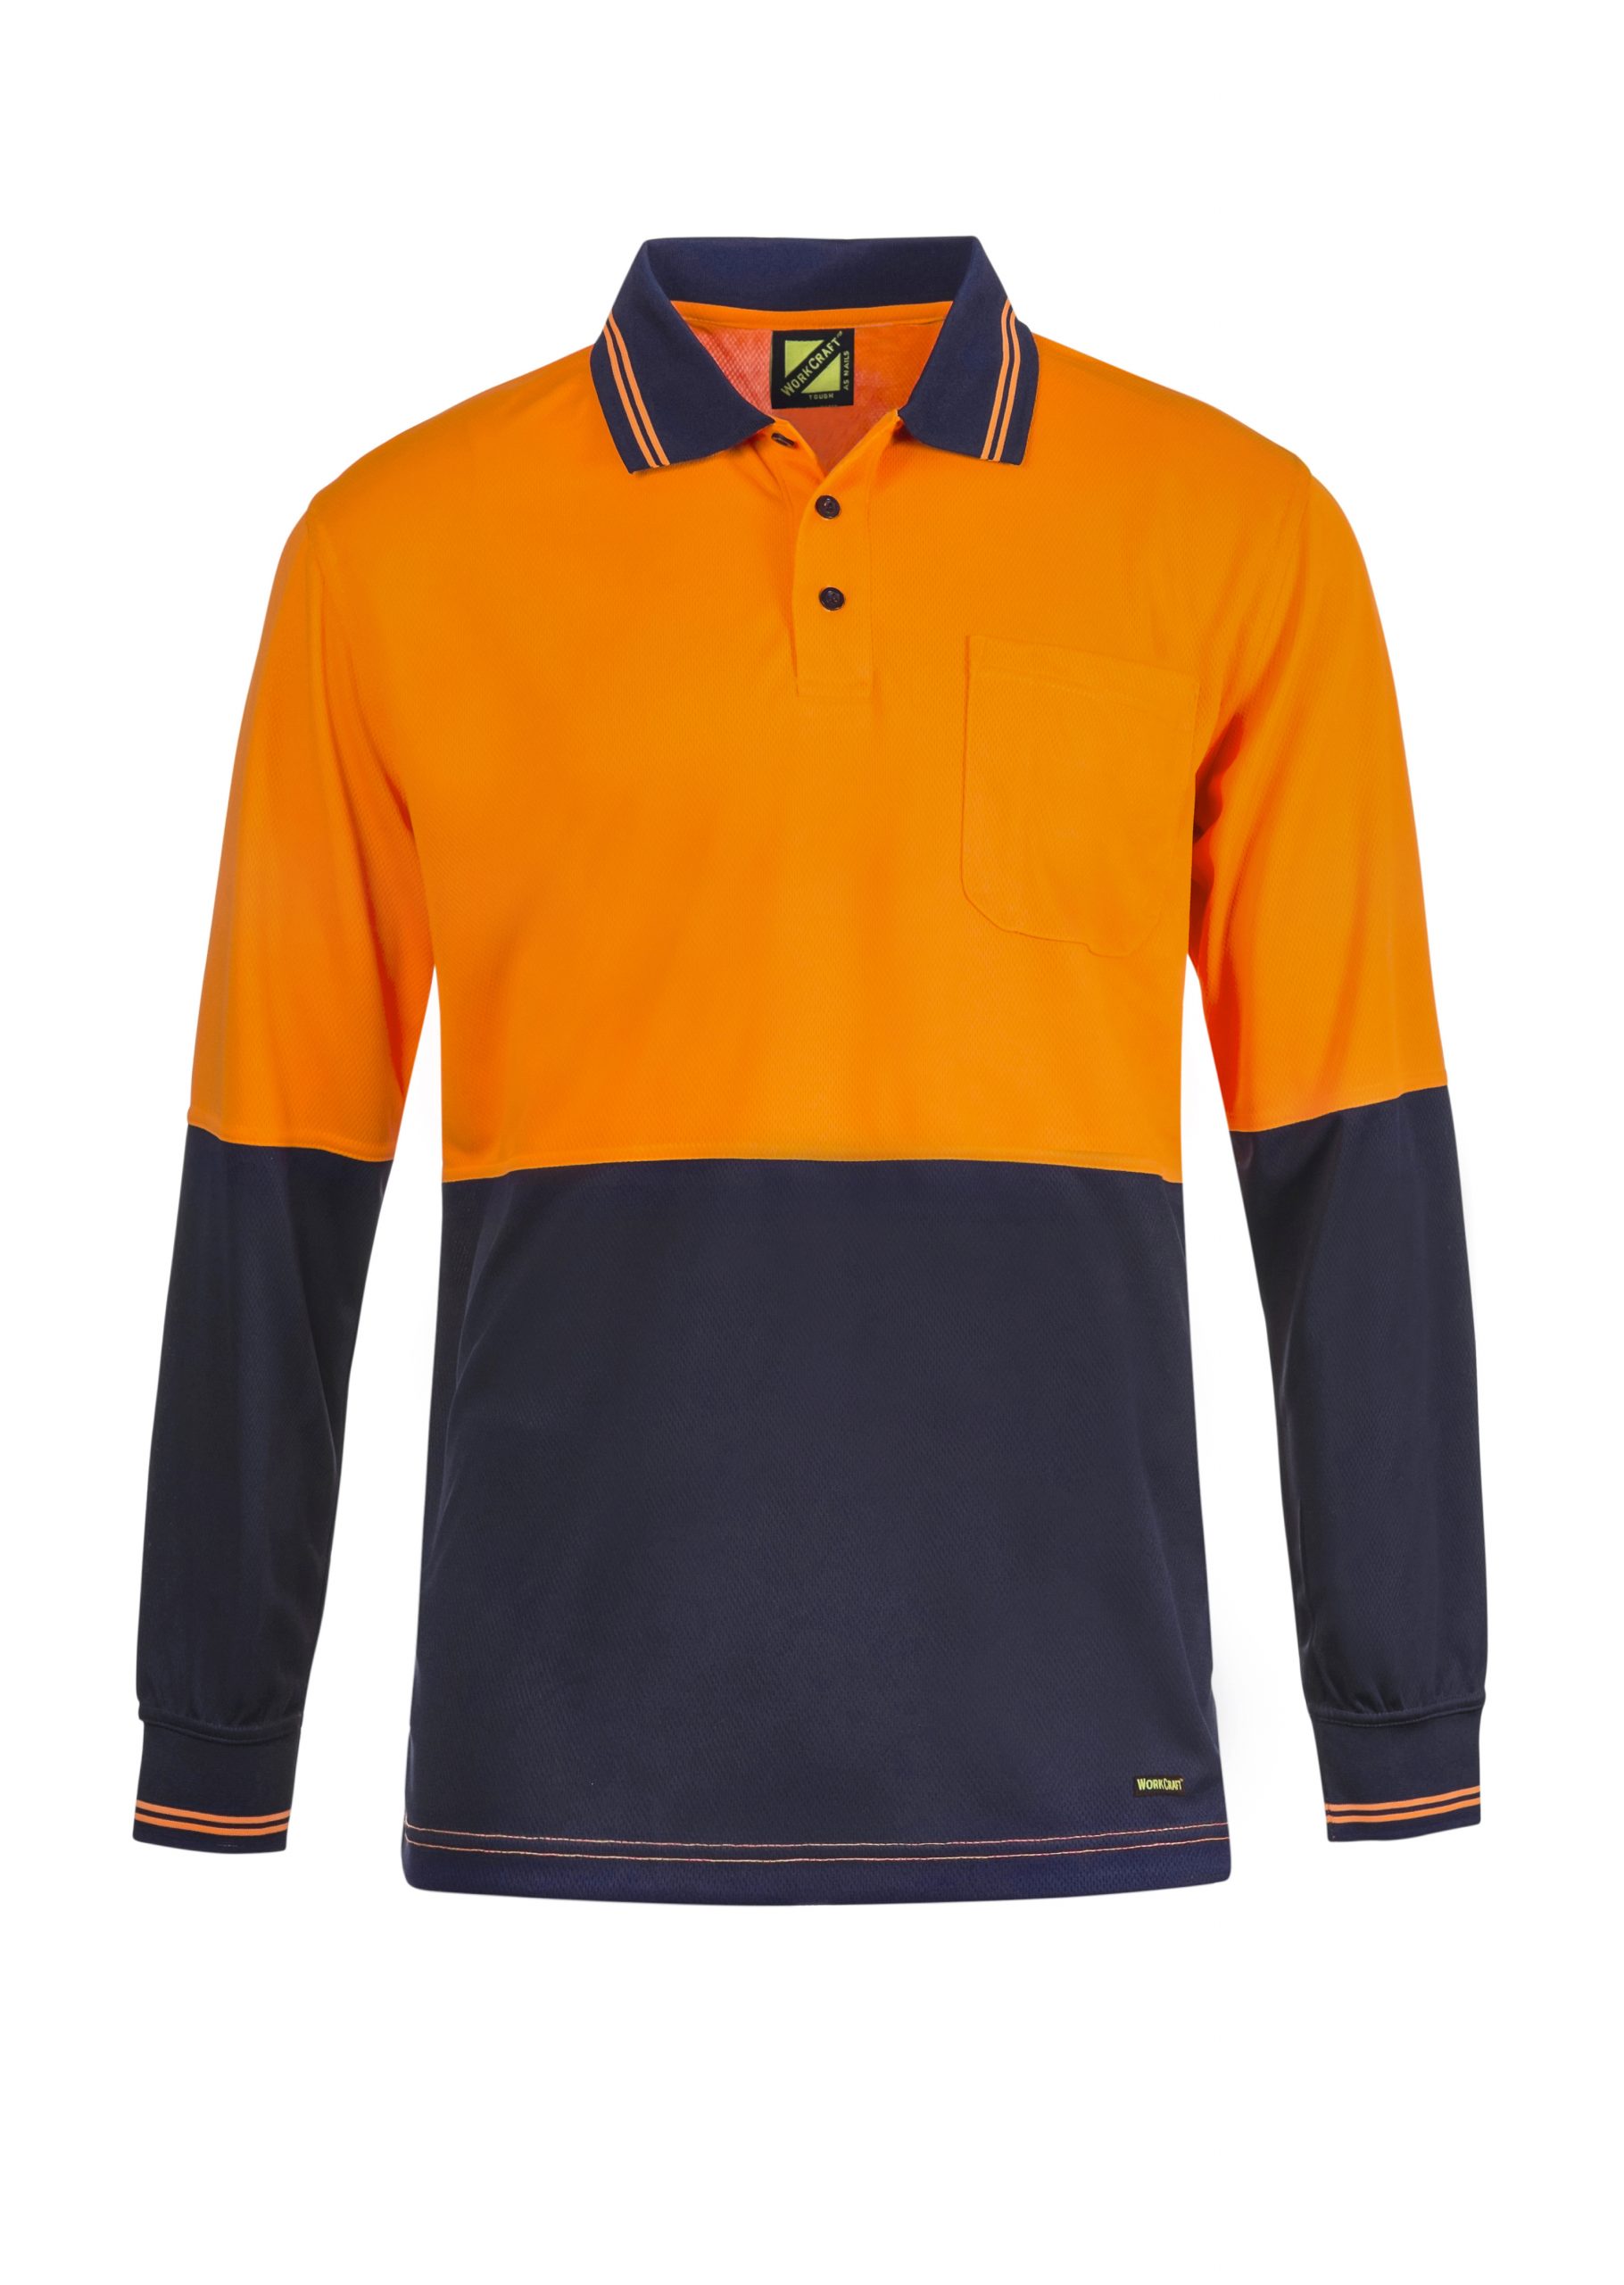 WSP202 HI VIS TWO TONE LONG SLEEVE MICROMESH POLO WITH POCKET NO1